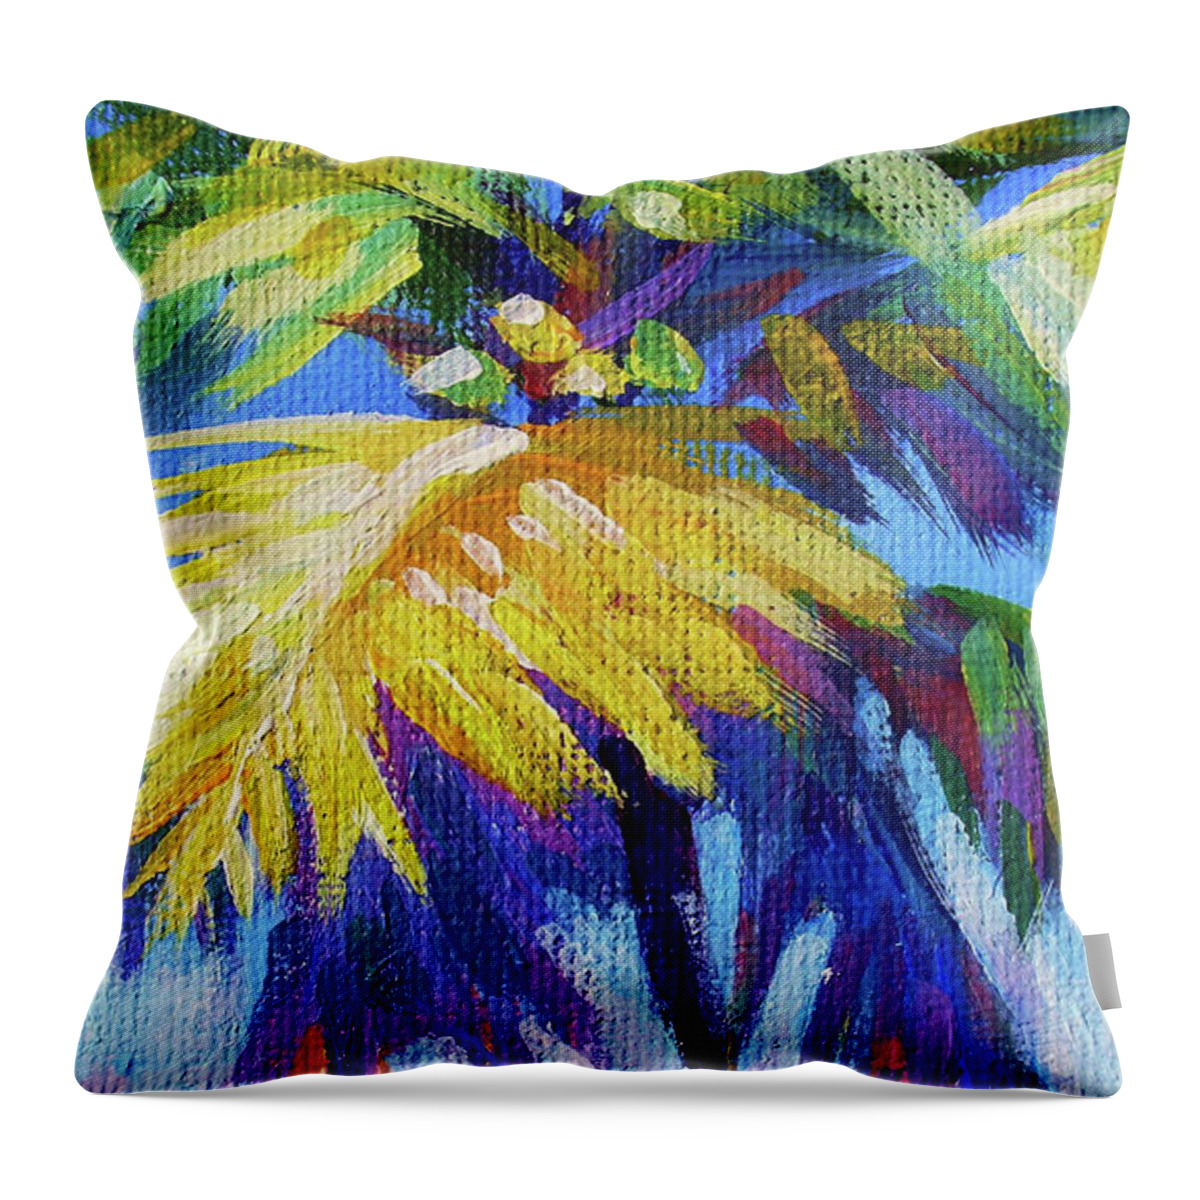 Bright. Palm Throw Pillow featuring the painting Bright Palm 16x9 by John Clark